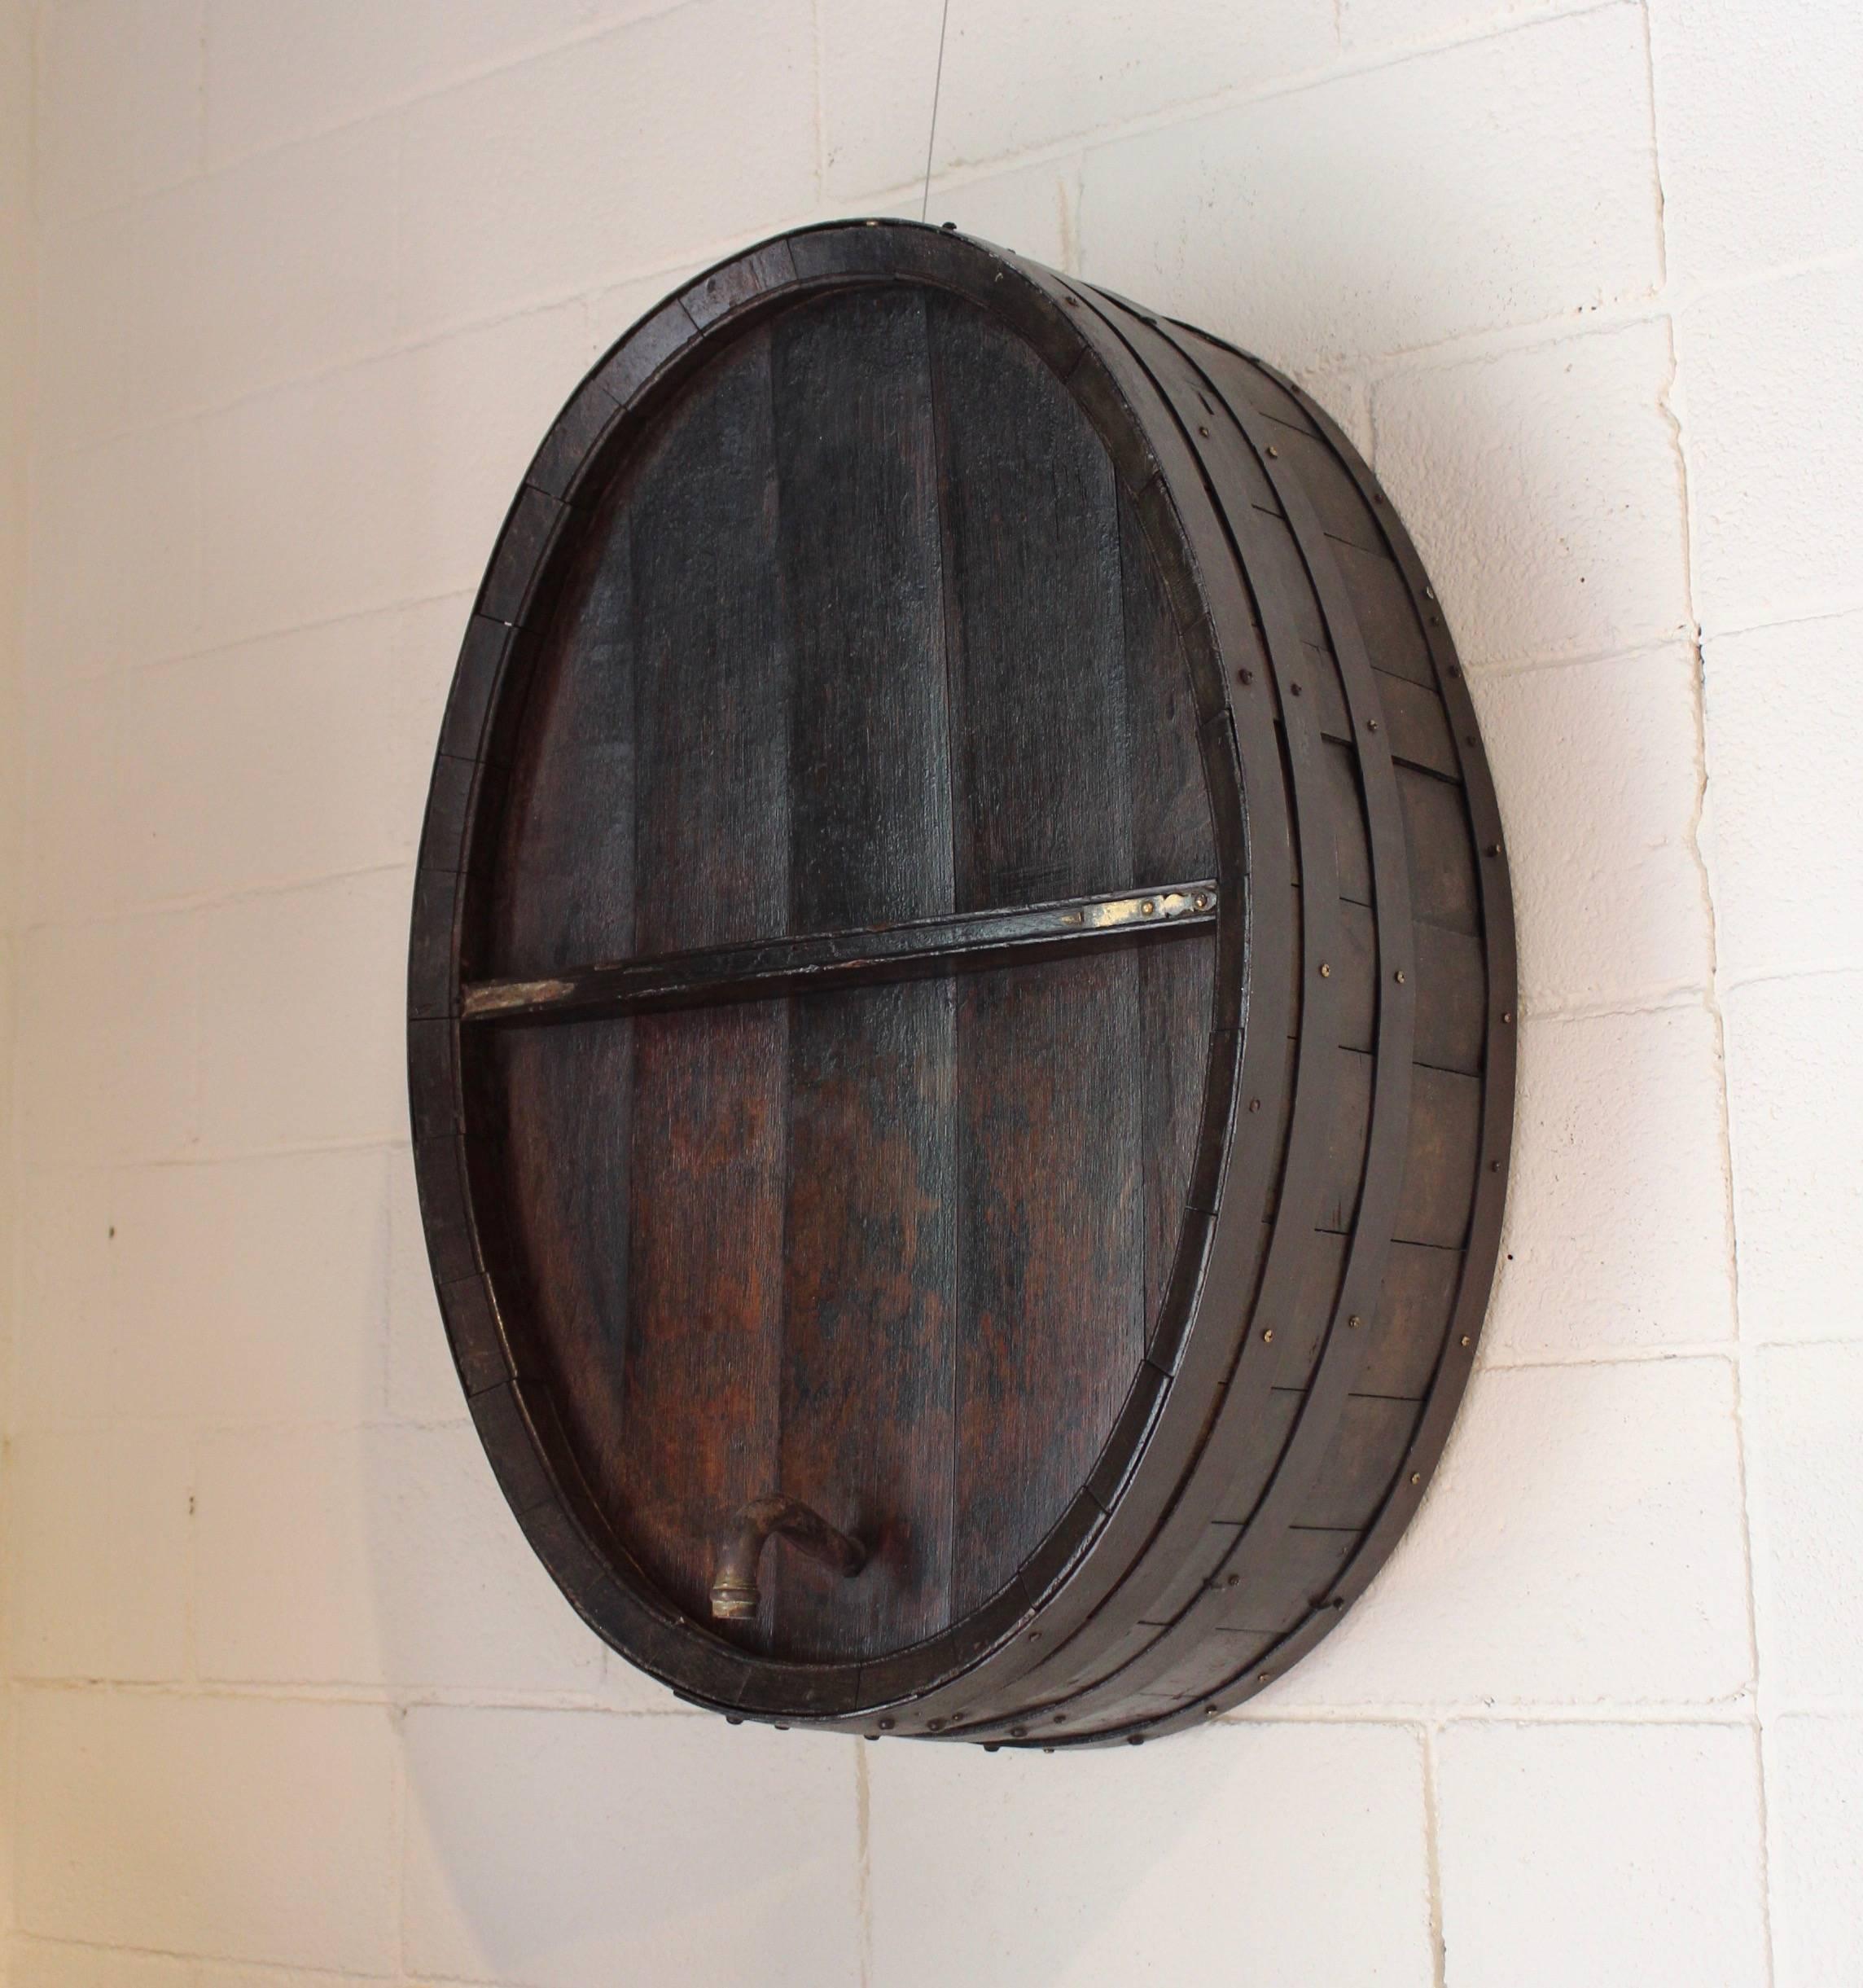 Antique French iron banded wine barrel as wall decor, circa 1900.
Wine barrel comes with brass spout and hardware. 
Dark wood antique brown natural patina. 
Wine cask face is from Normandy, known for their white wines: The wines produced in